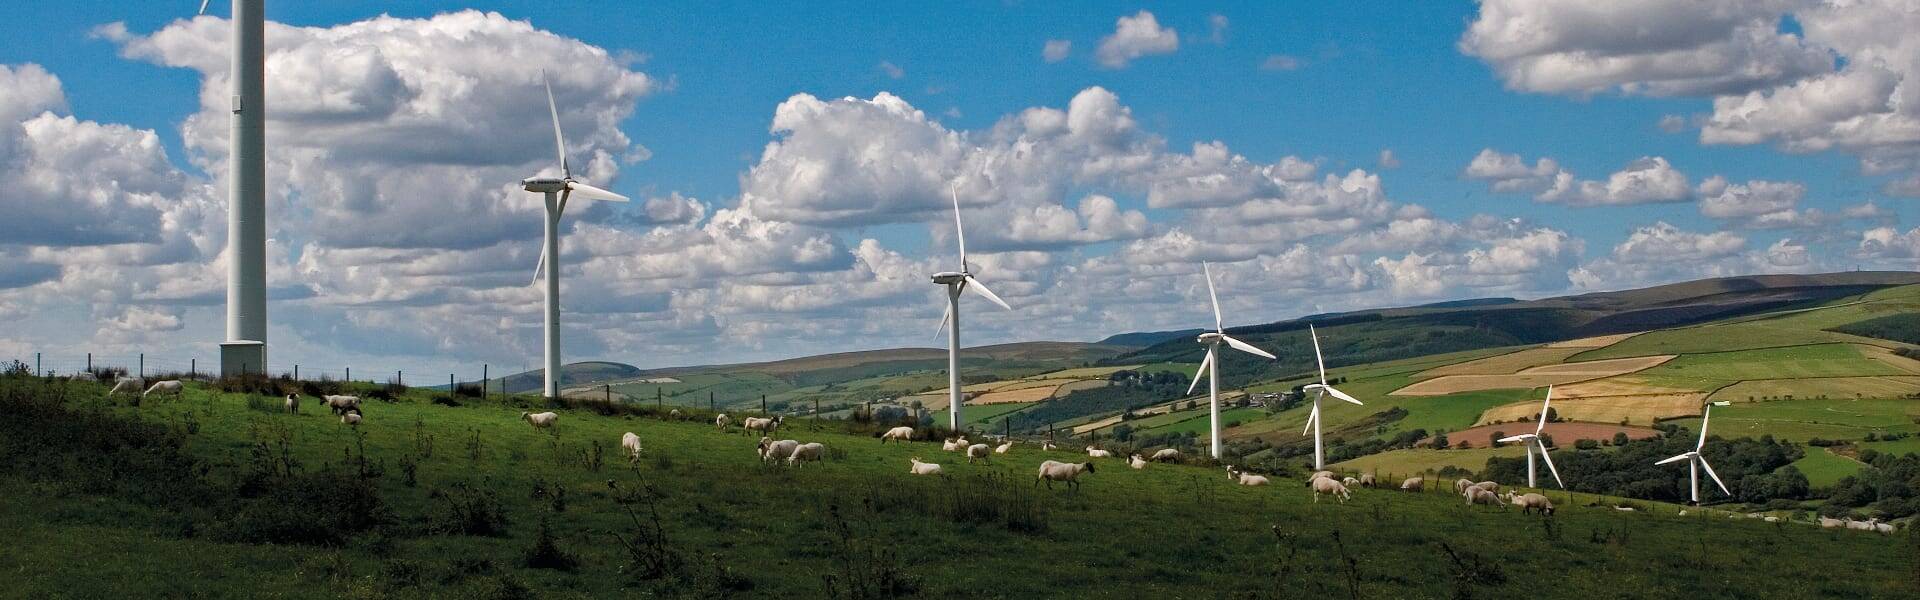 UK most attractive destination for investment in renewables